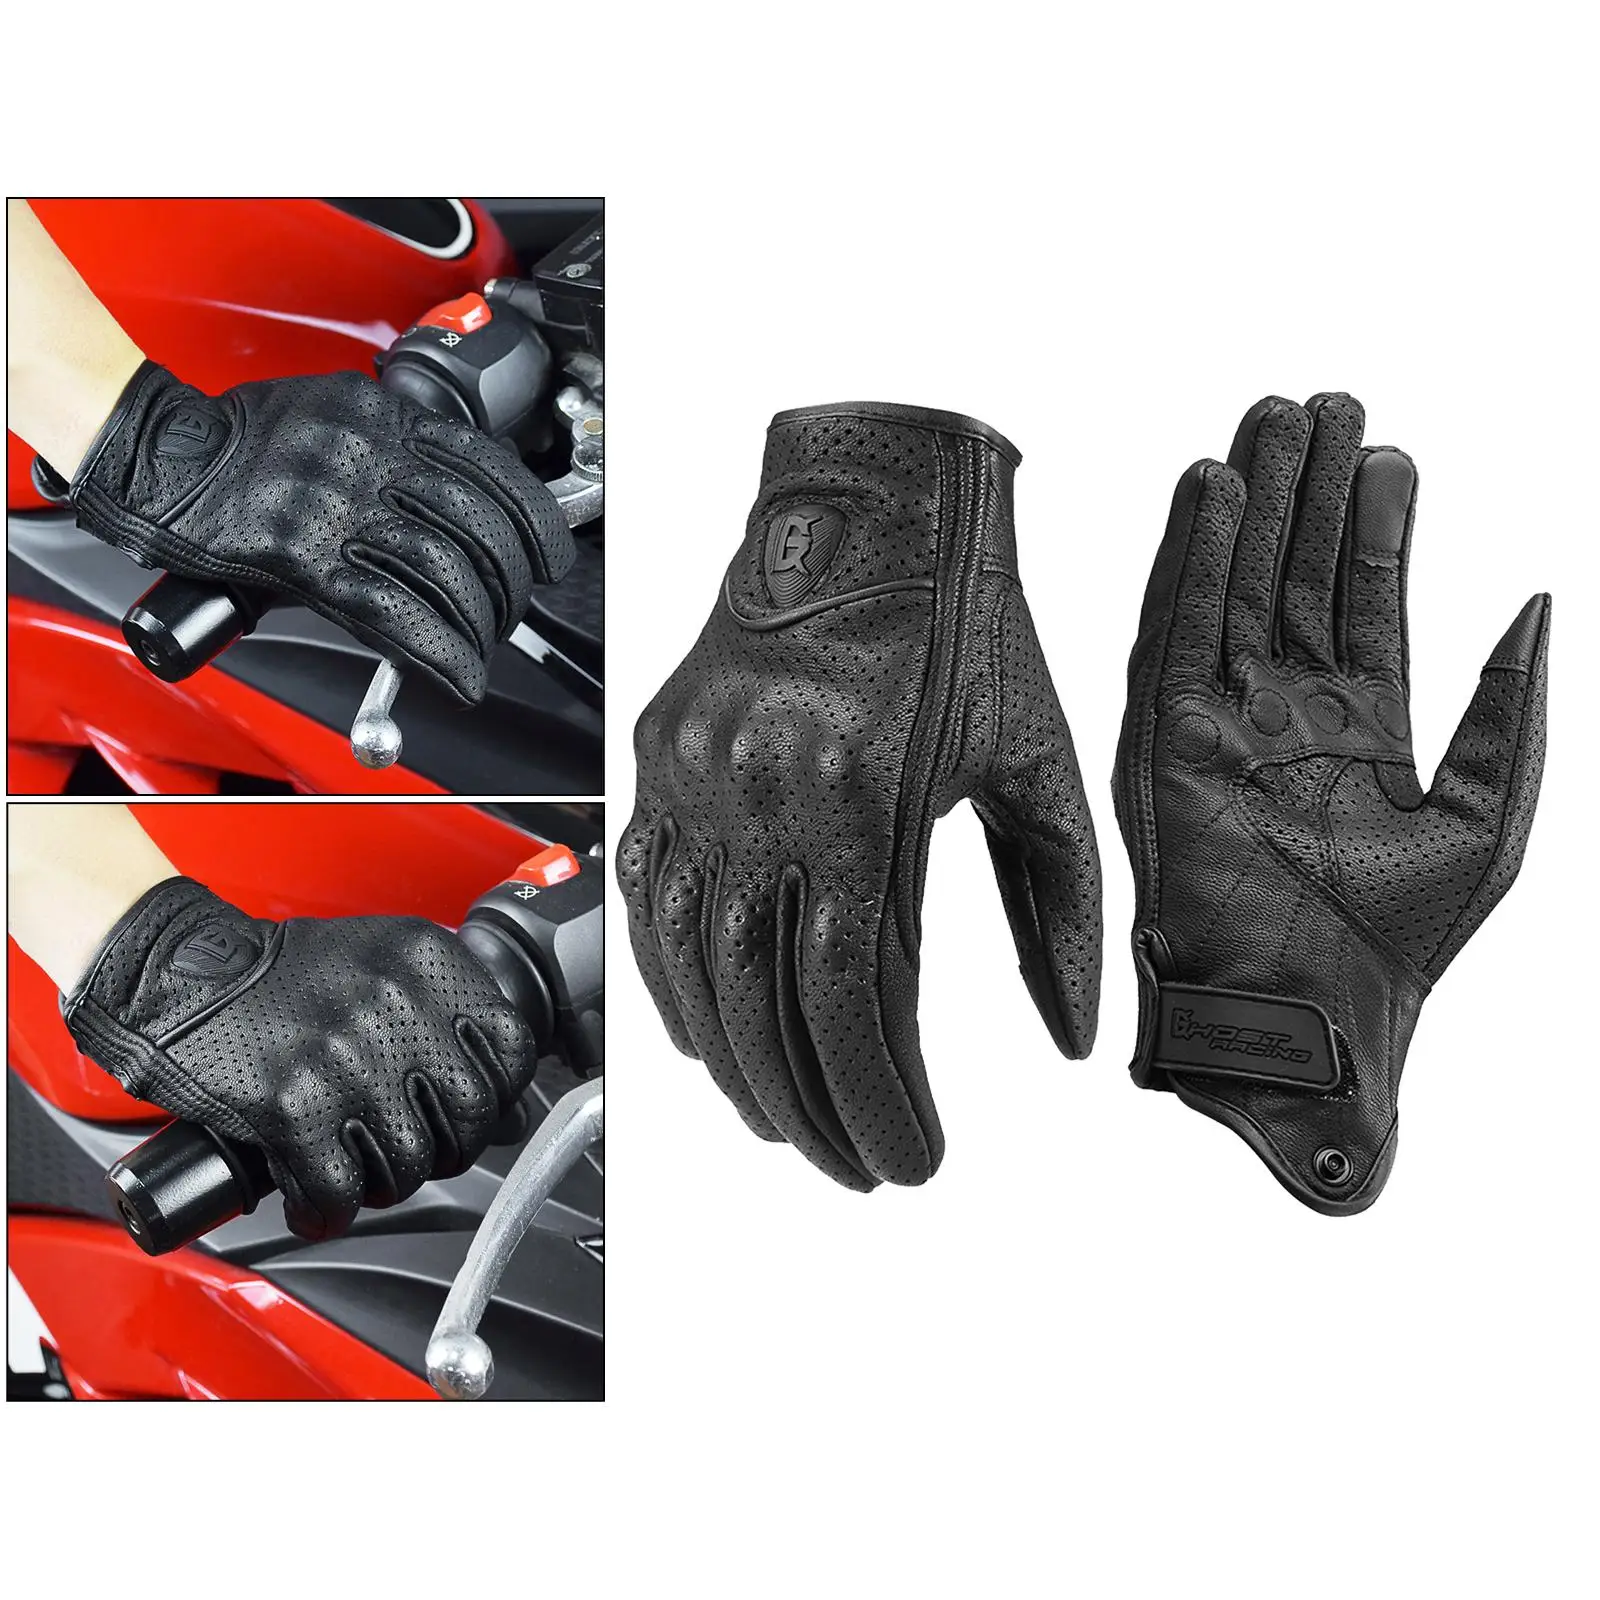 Goatskin Leather Touchscreen Motorcycle Riding Perforated Gloves Men Women